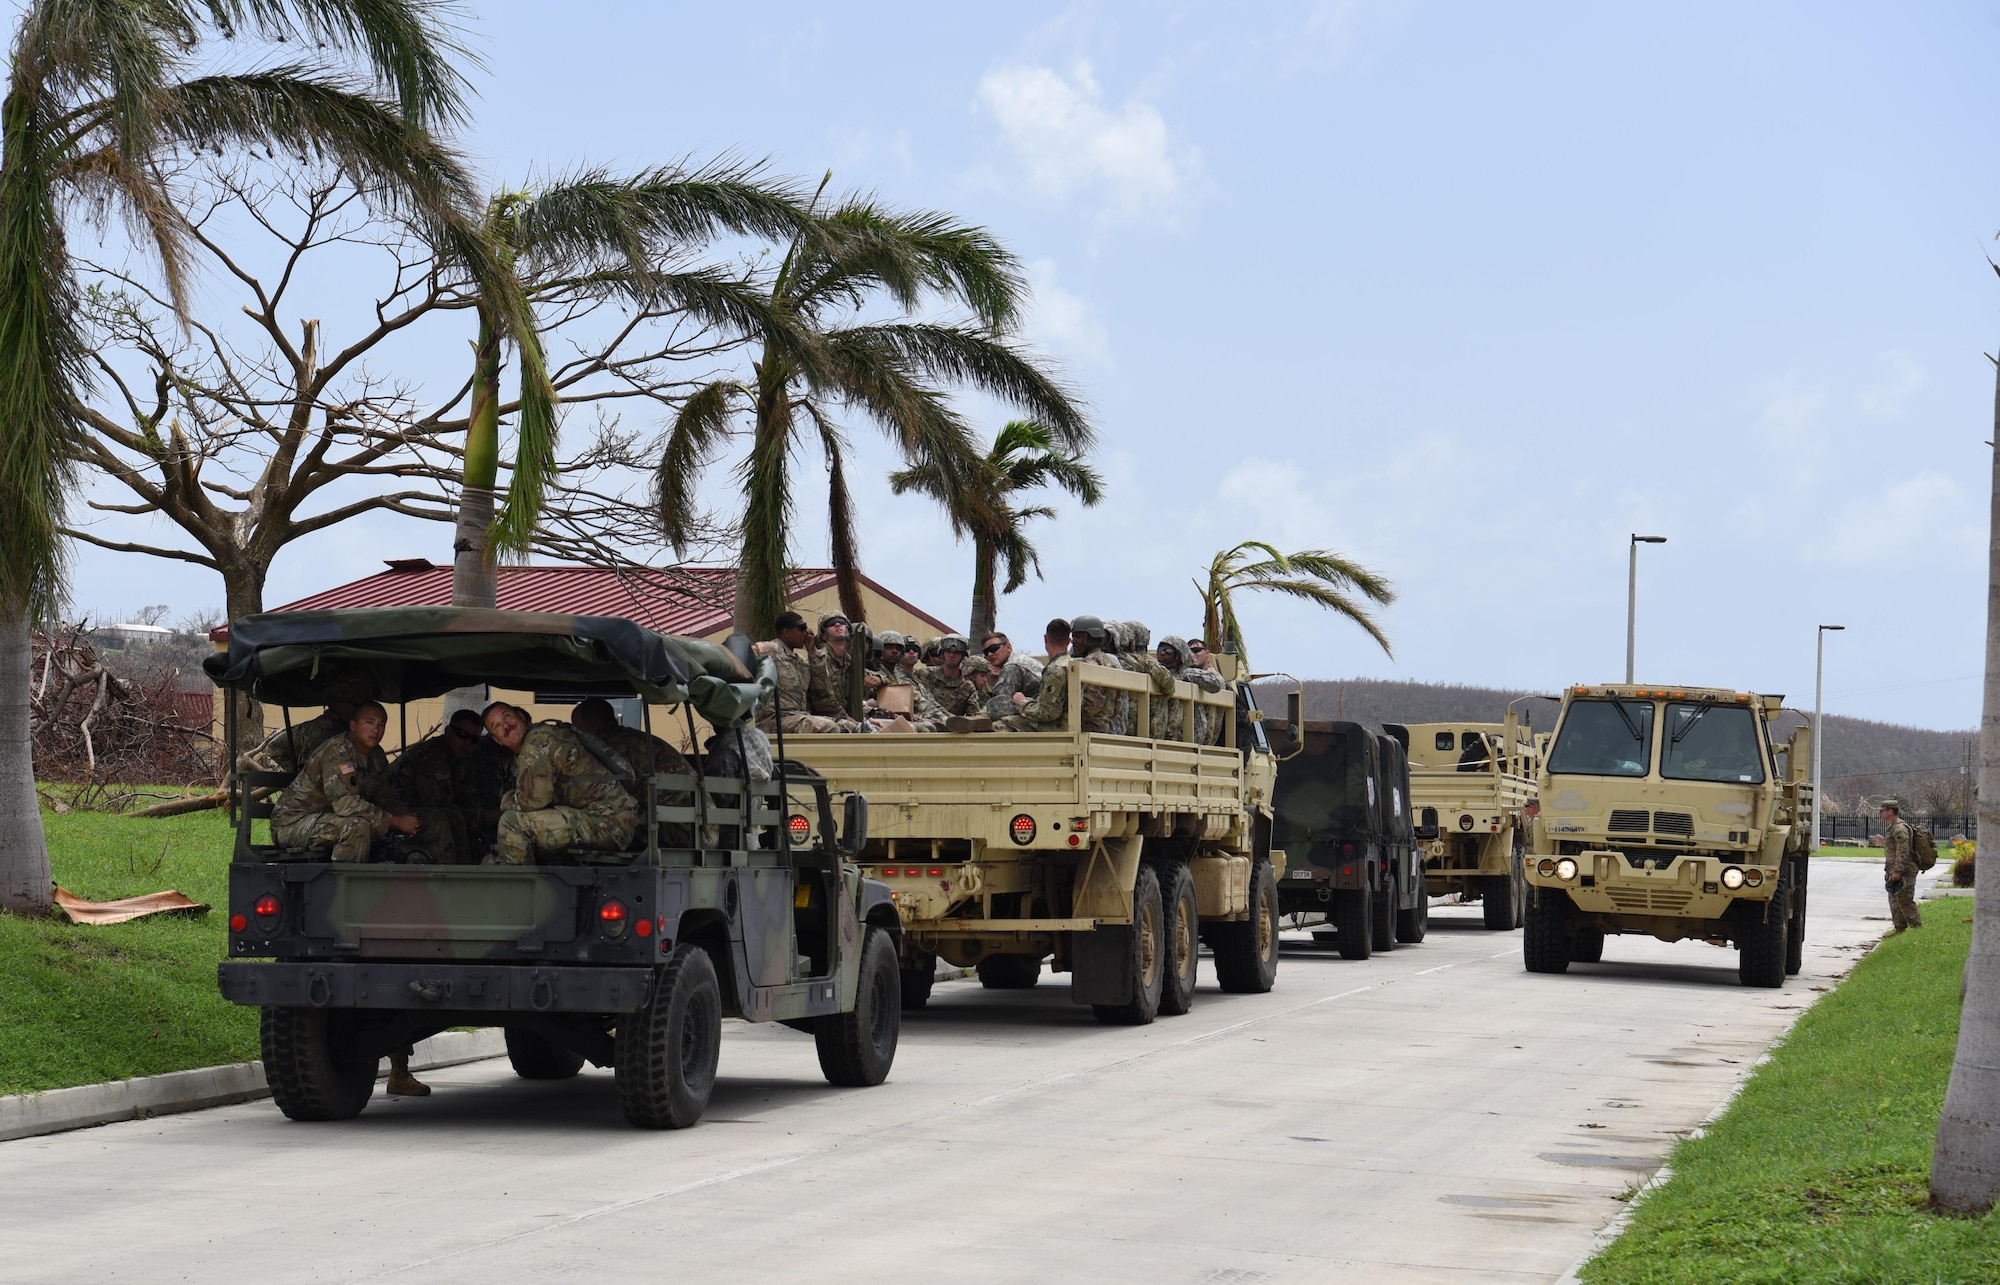 A National Guard convoy rolls out of the armory in St. Croix, U.S Virgin Islands in order to provide aid to the local community, September 28, 2017. Hurricane Maria left many on the island without food or water. (U.S. Air National Guard photo by Tech. Sgt. Gregory Ferreira/Released)